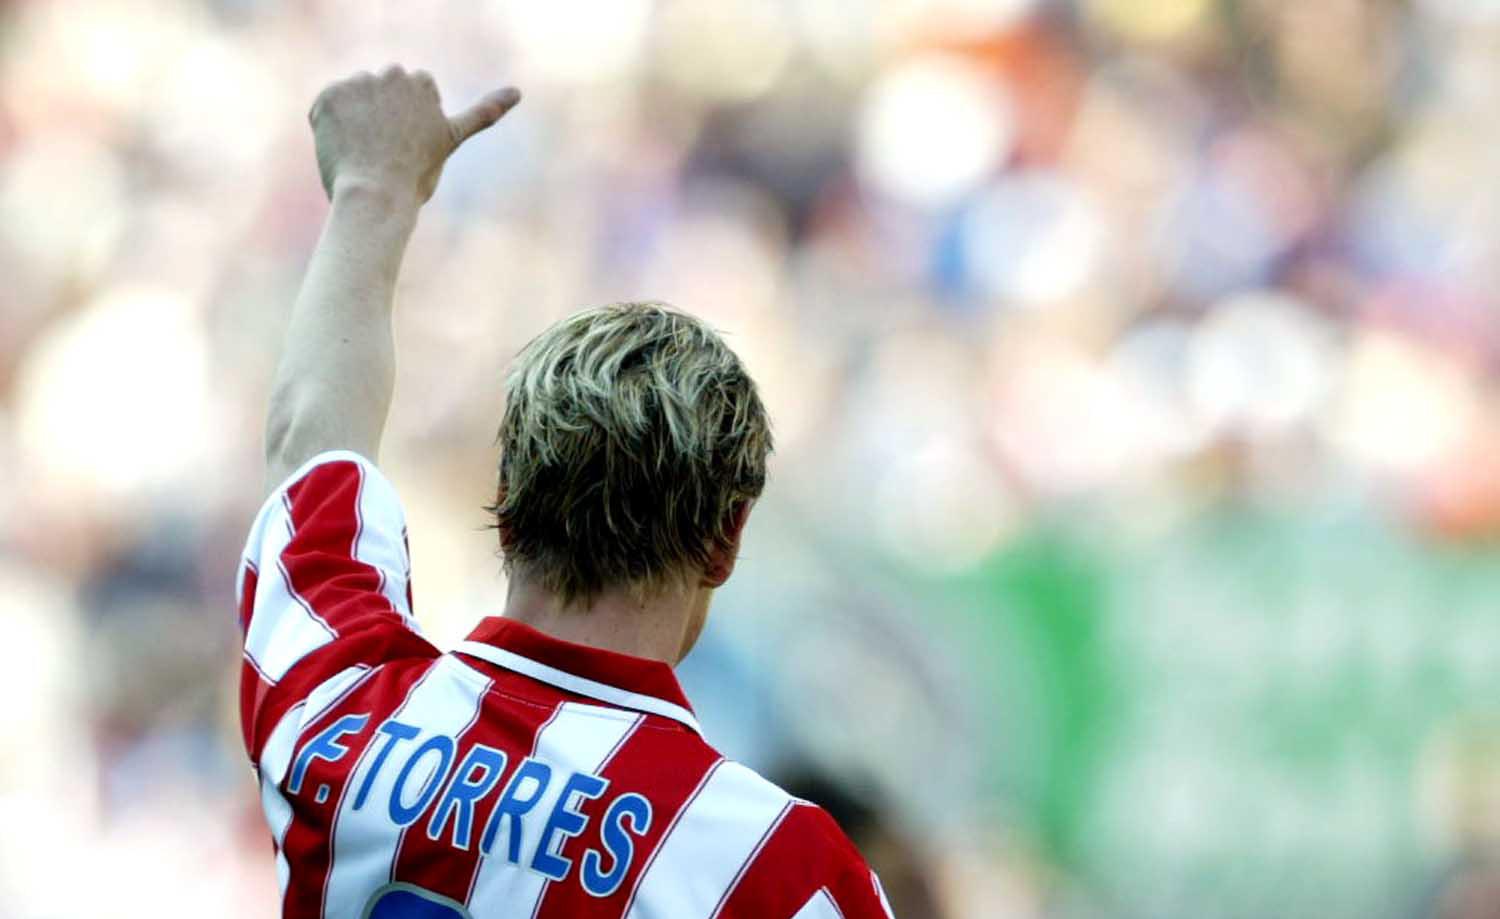 Fernando Torres At Last Back Home Thanks To All That Have Made This Dream Come True Forza Atleti Torreshavuelto Http T Co Hzjmi5v6gl Twitter